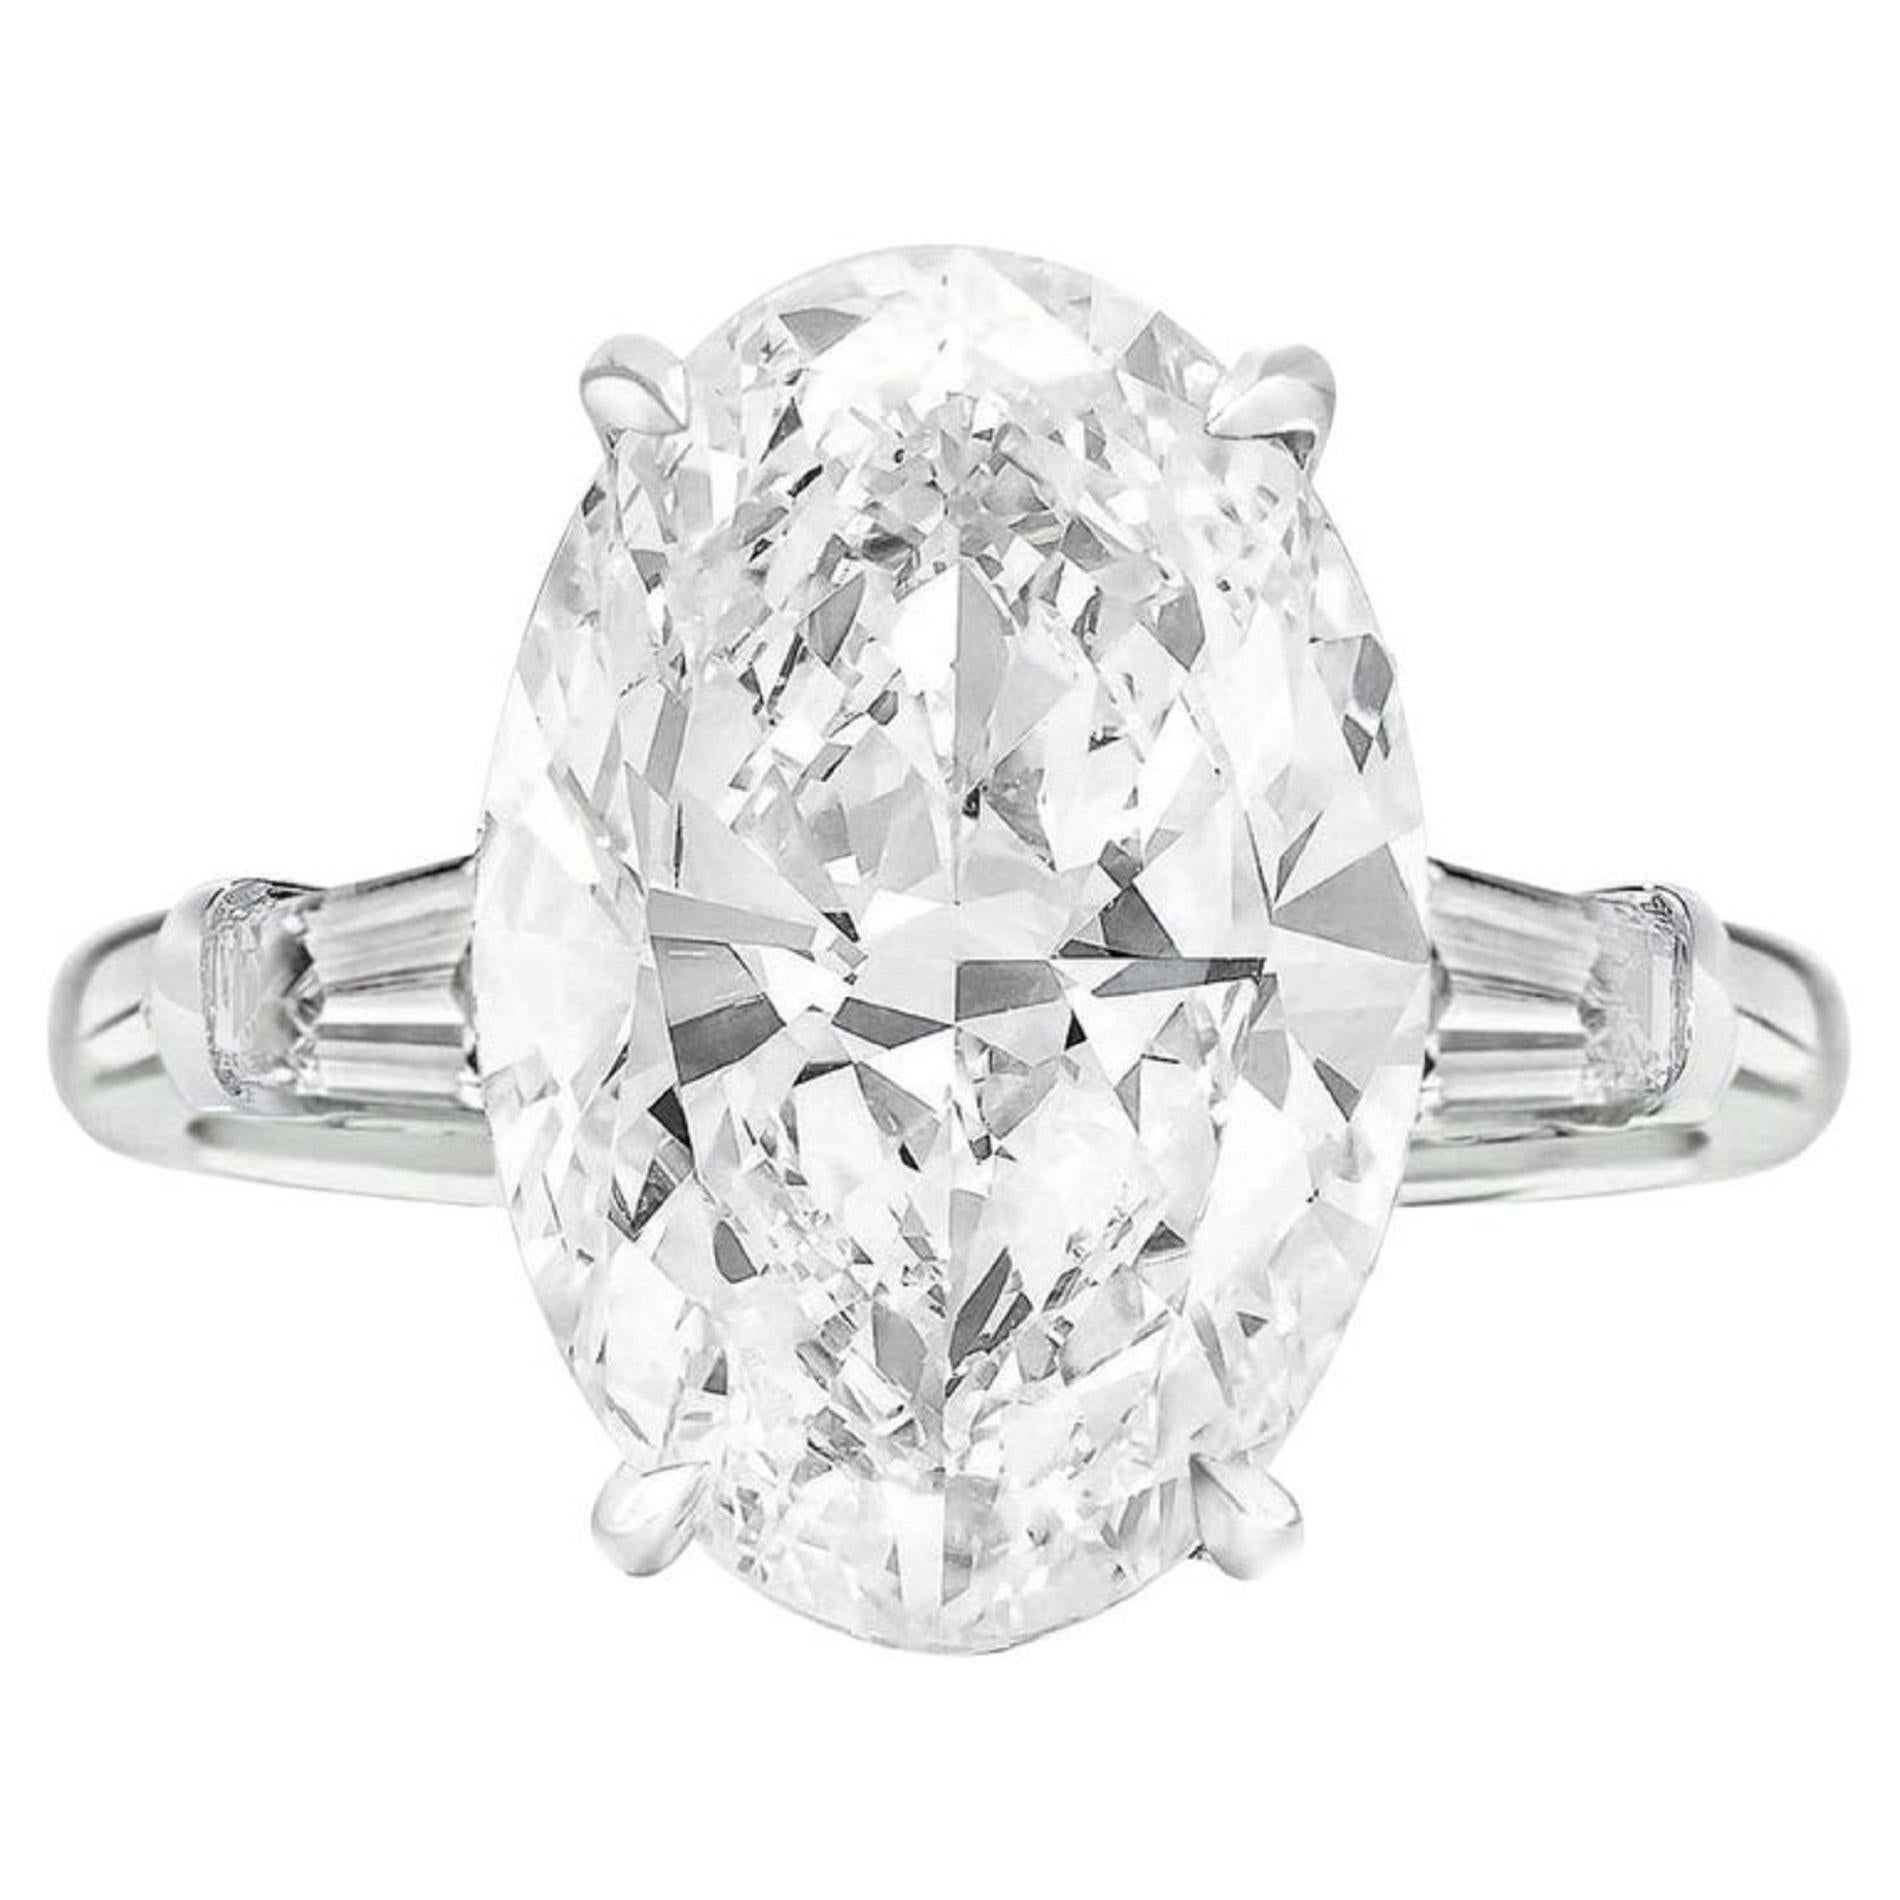 Modern Exceptional GIA Certified 5 Carat Oval Diamond Ring For Sale